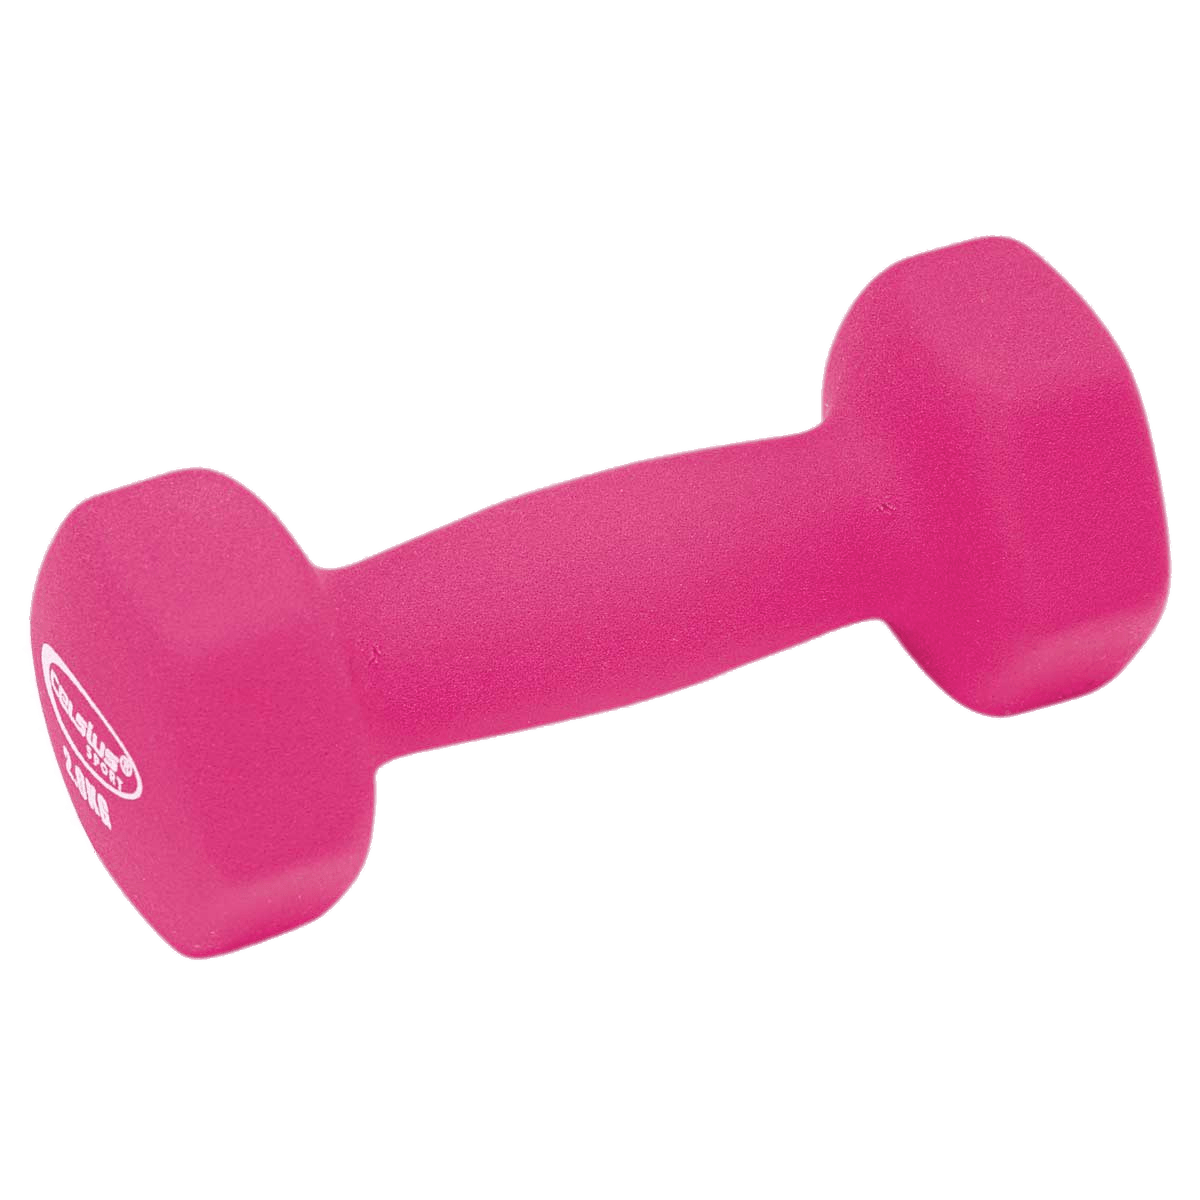 Pink Dumbbells PNG HD Quality